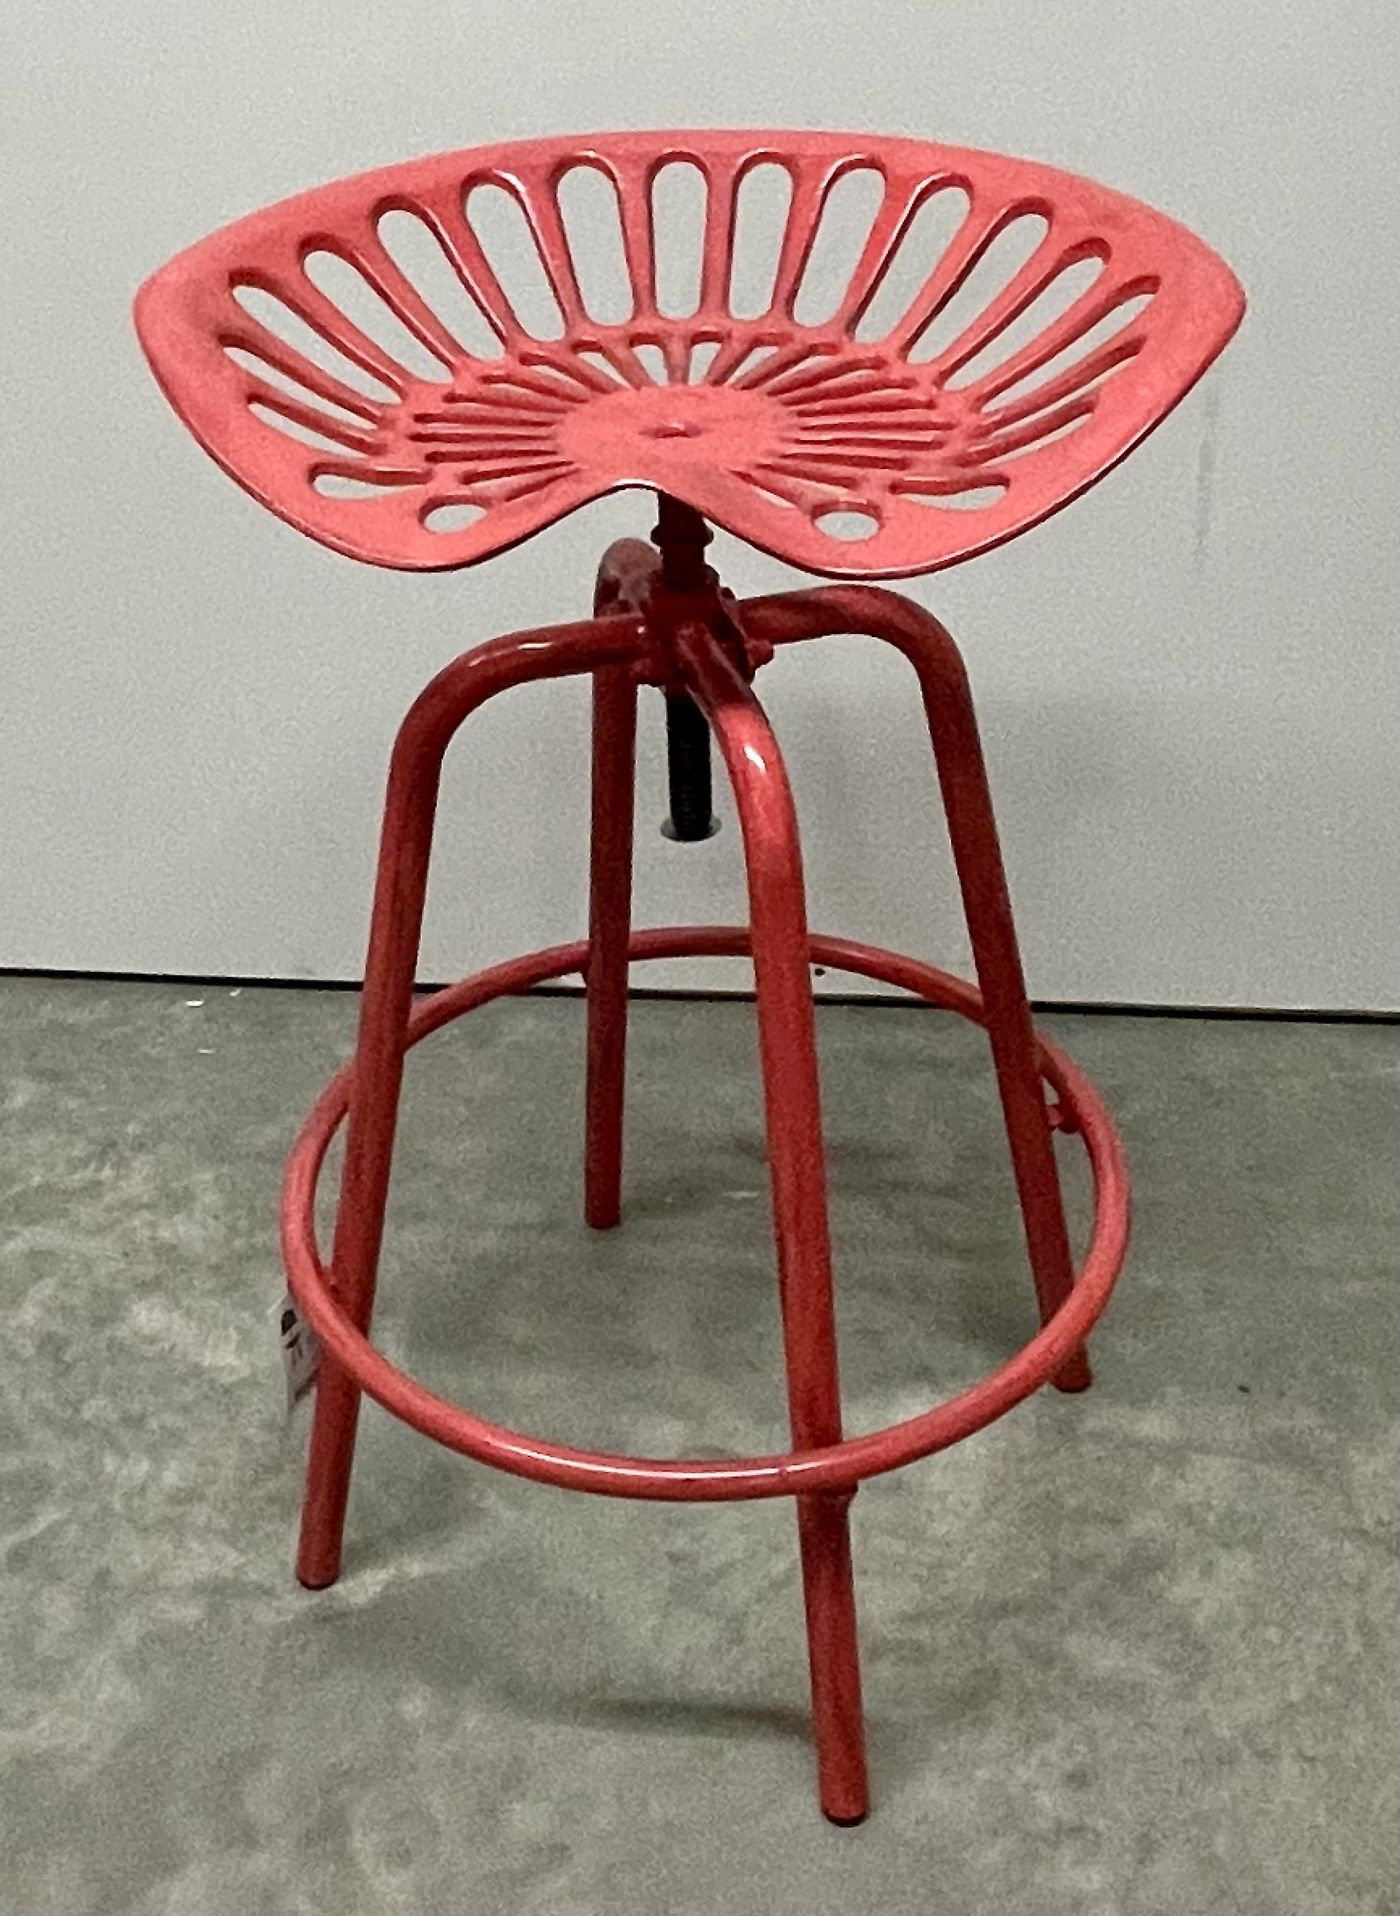 Cast Iron Tractor Chair